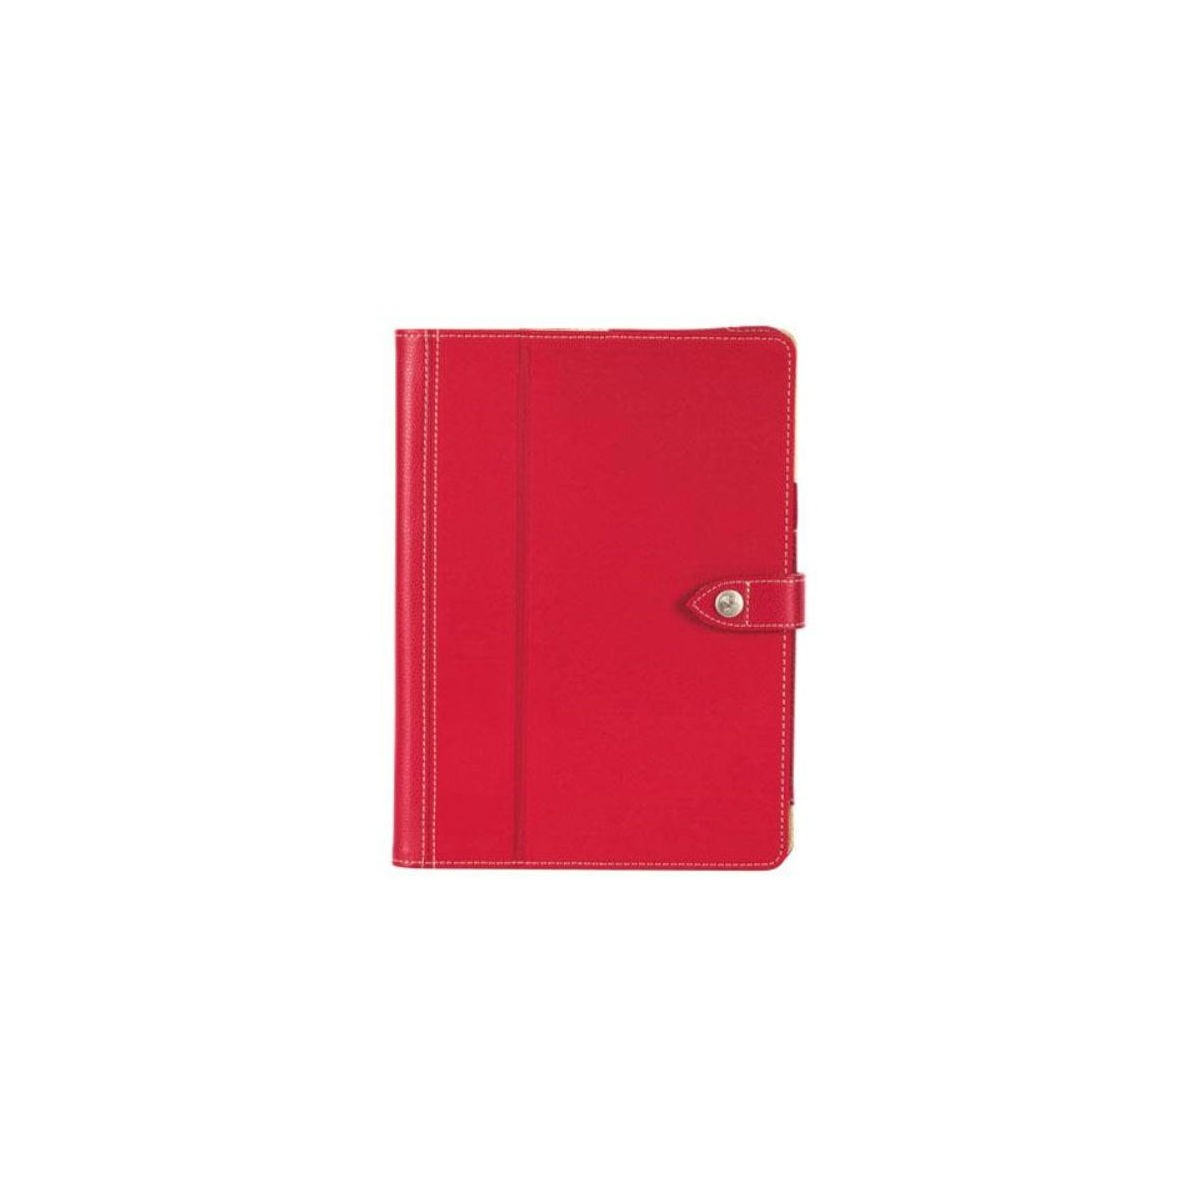 Griffin Back Bay Folio for iPad Air RED